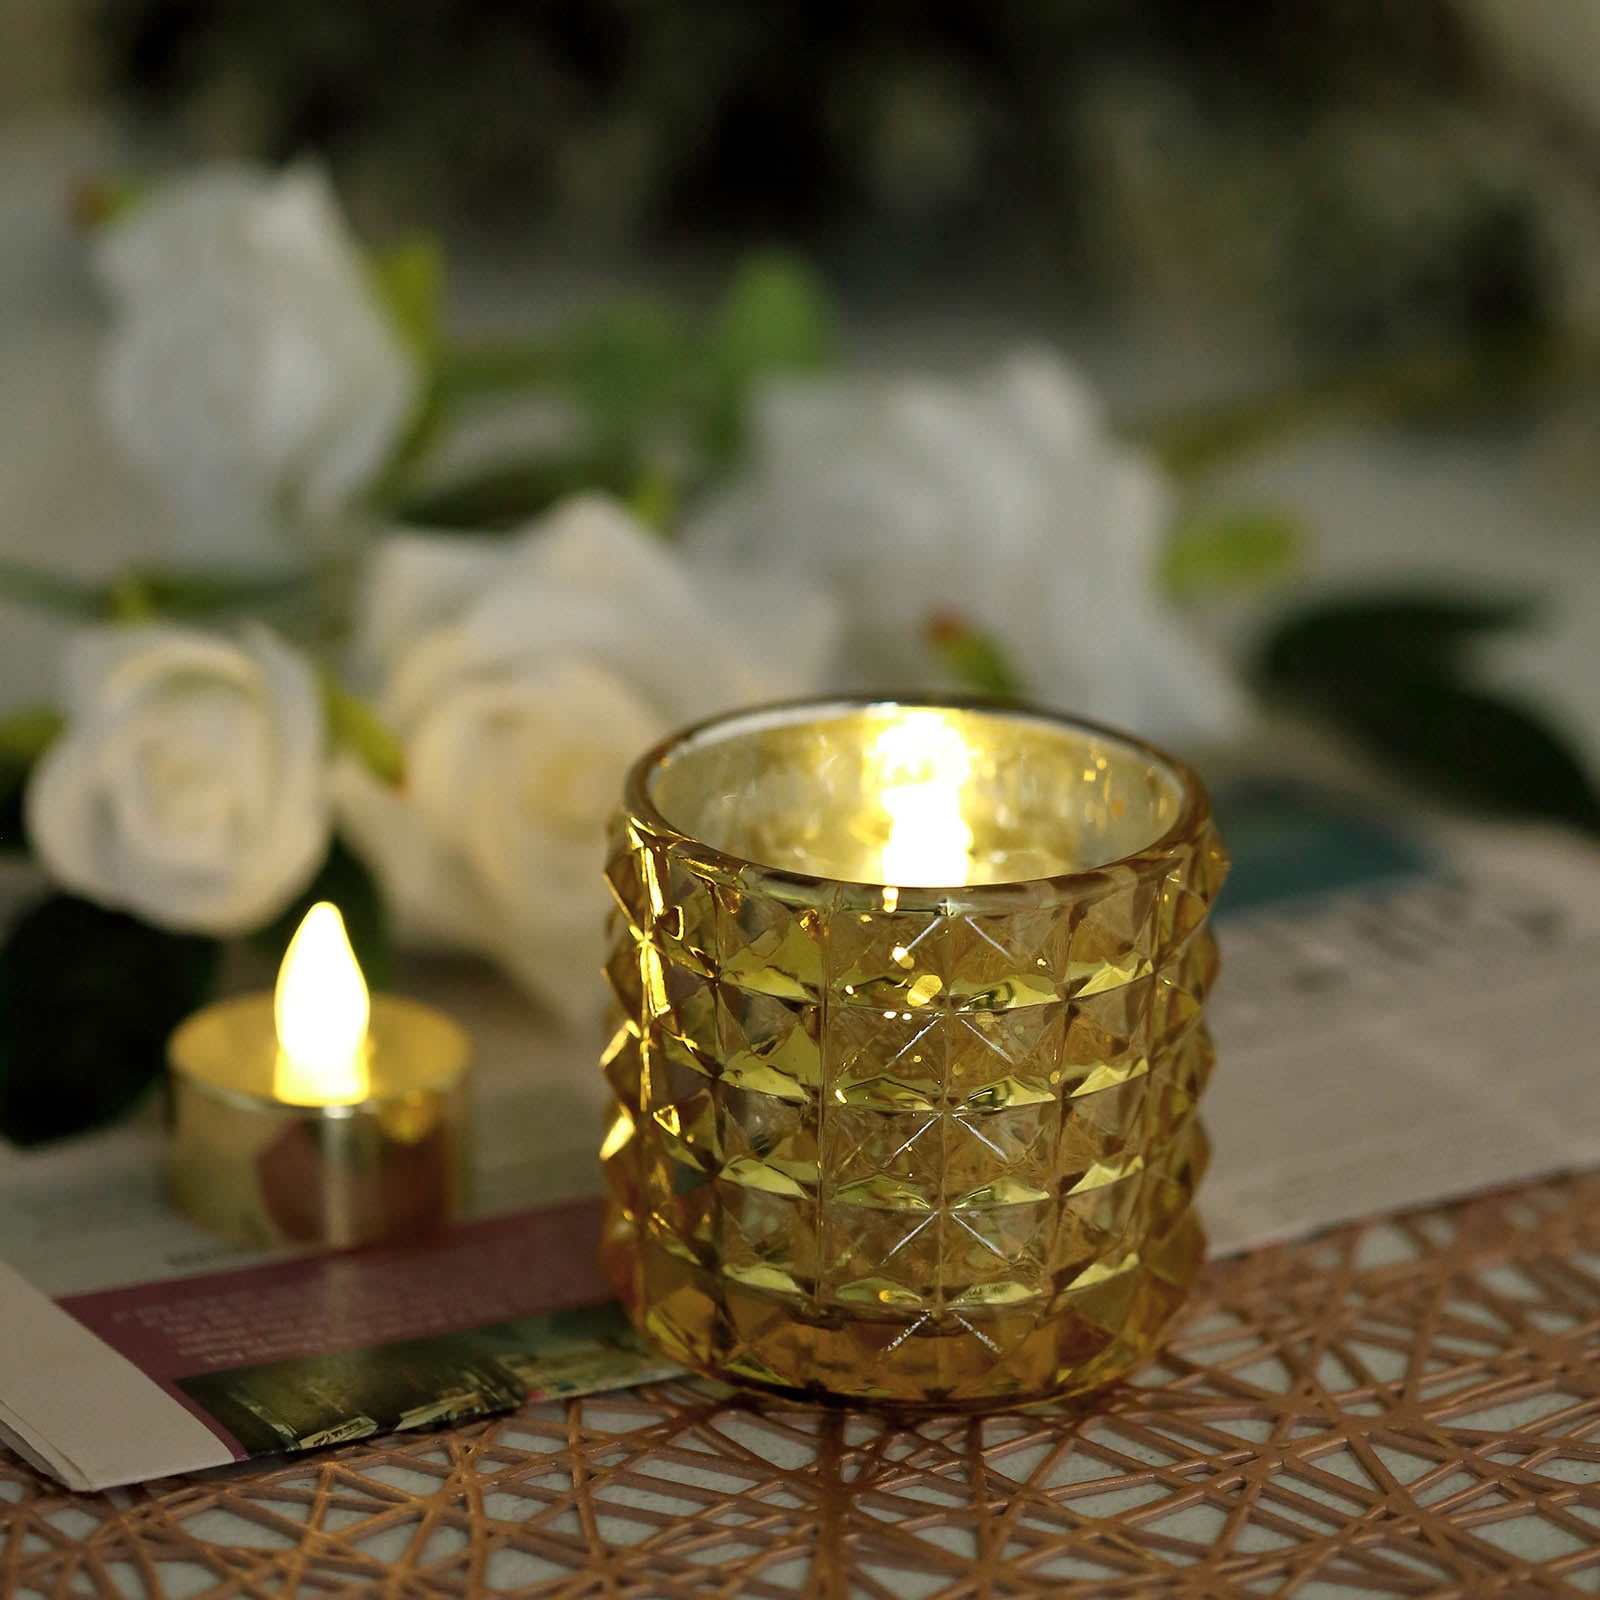 Efavormart 2 Pack Gold/Black Metal with Acrylic Crystal Tealight